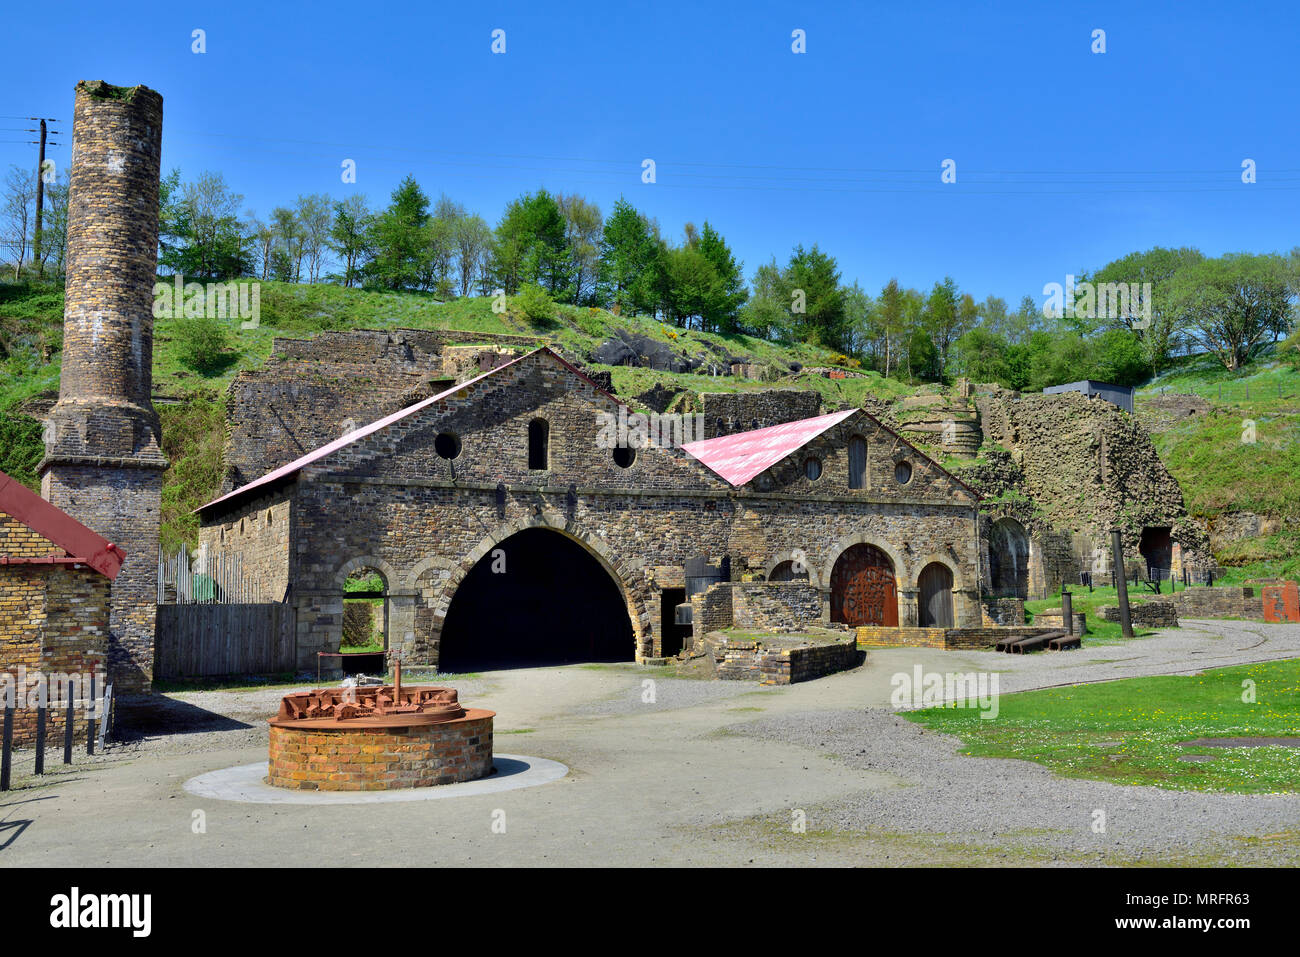 Blaenavon Ironworks blast furnace complex a former industrial site now a National museum, South Wales Valleys, UK  The ironworks was of crucial import Stock Photo